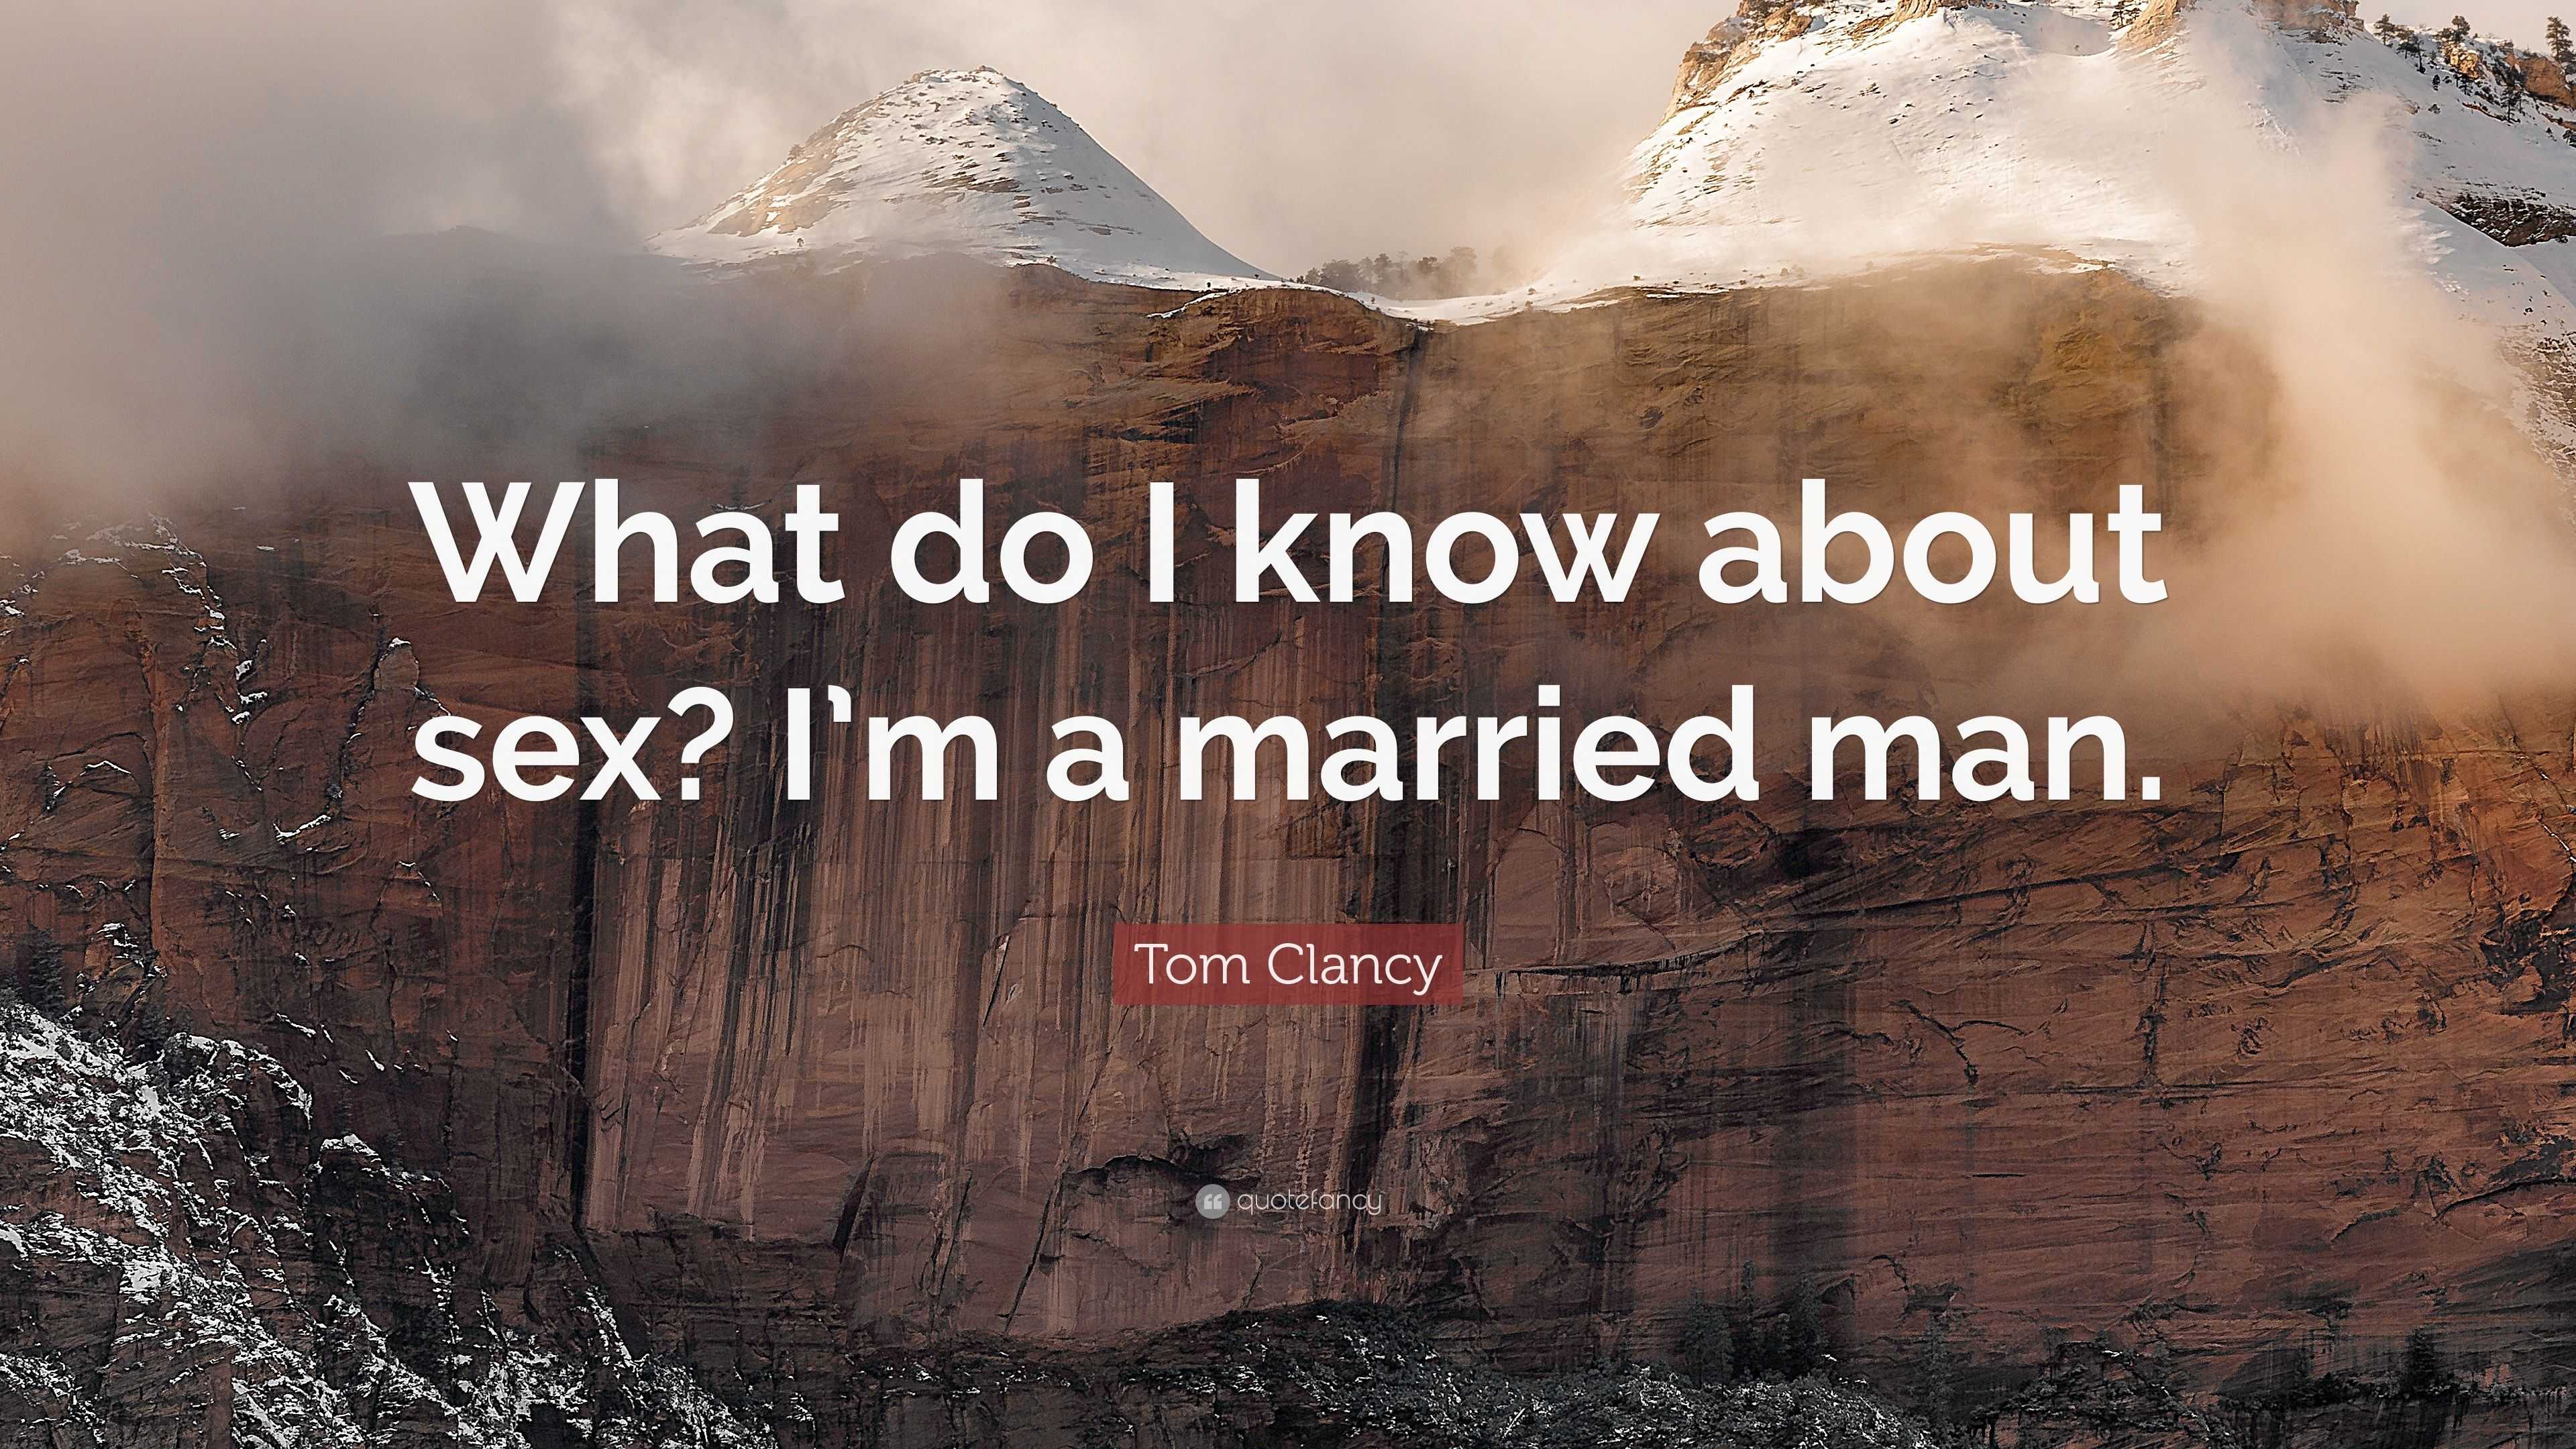 Tom Clancy Quote “What do I know about sex? Im a married man.”